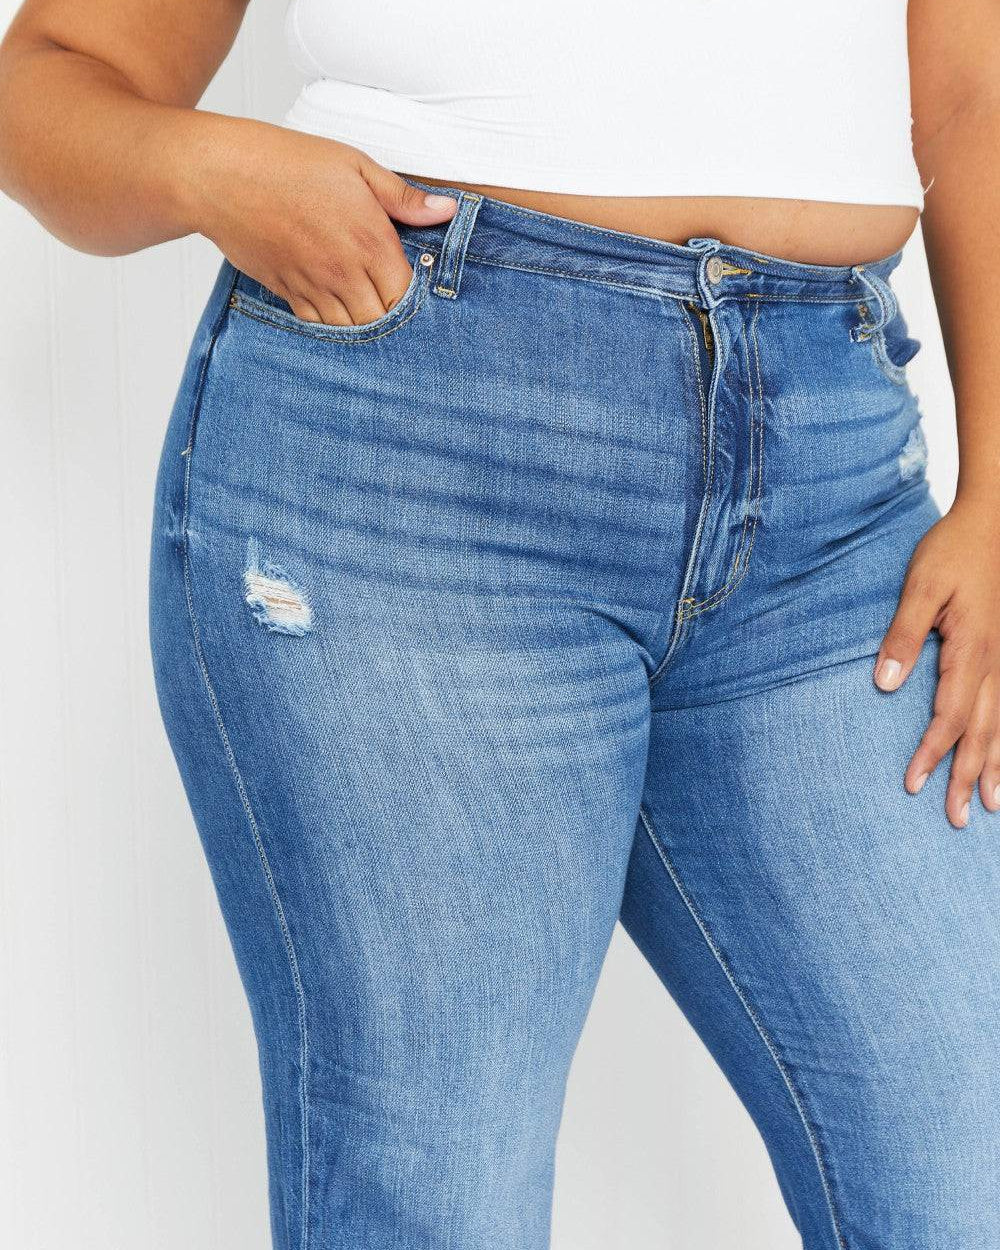 "Fall in Love with the Perfect Mix of Casual and Chic - Zenana Brie Full Size Mom Jeans: Crafted to Last for a Lifetime of Memories" - Guy Christopher 